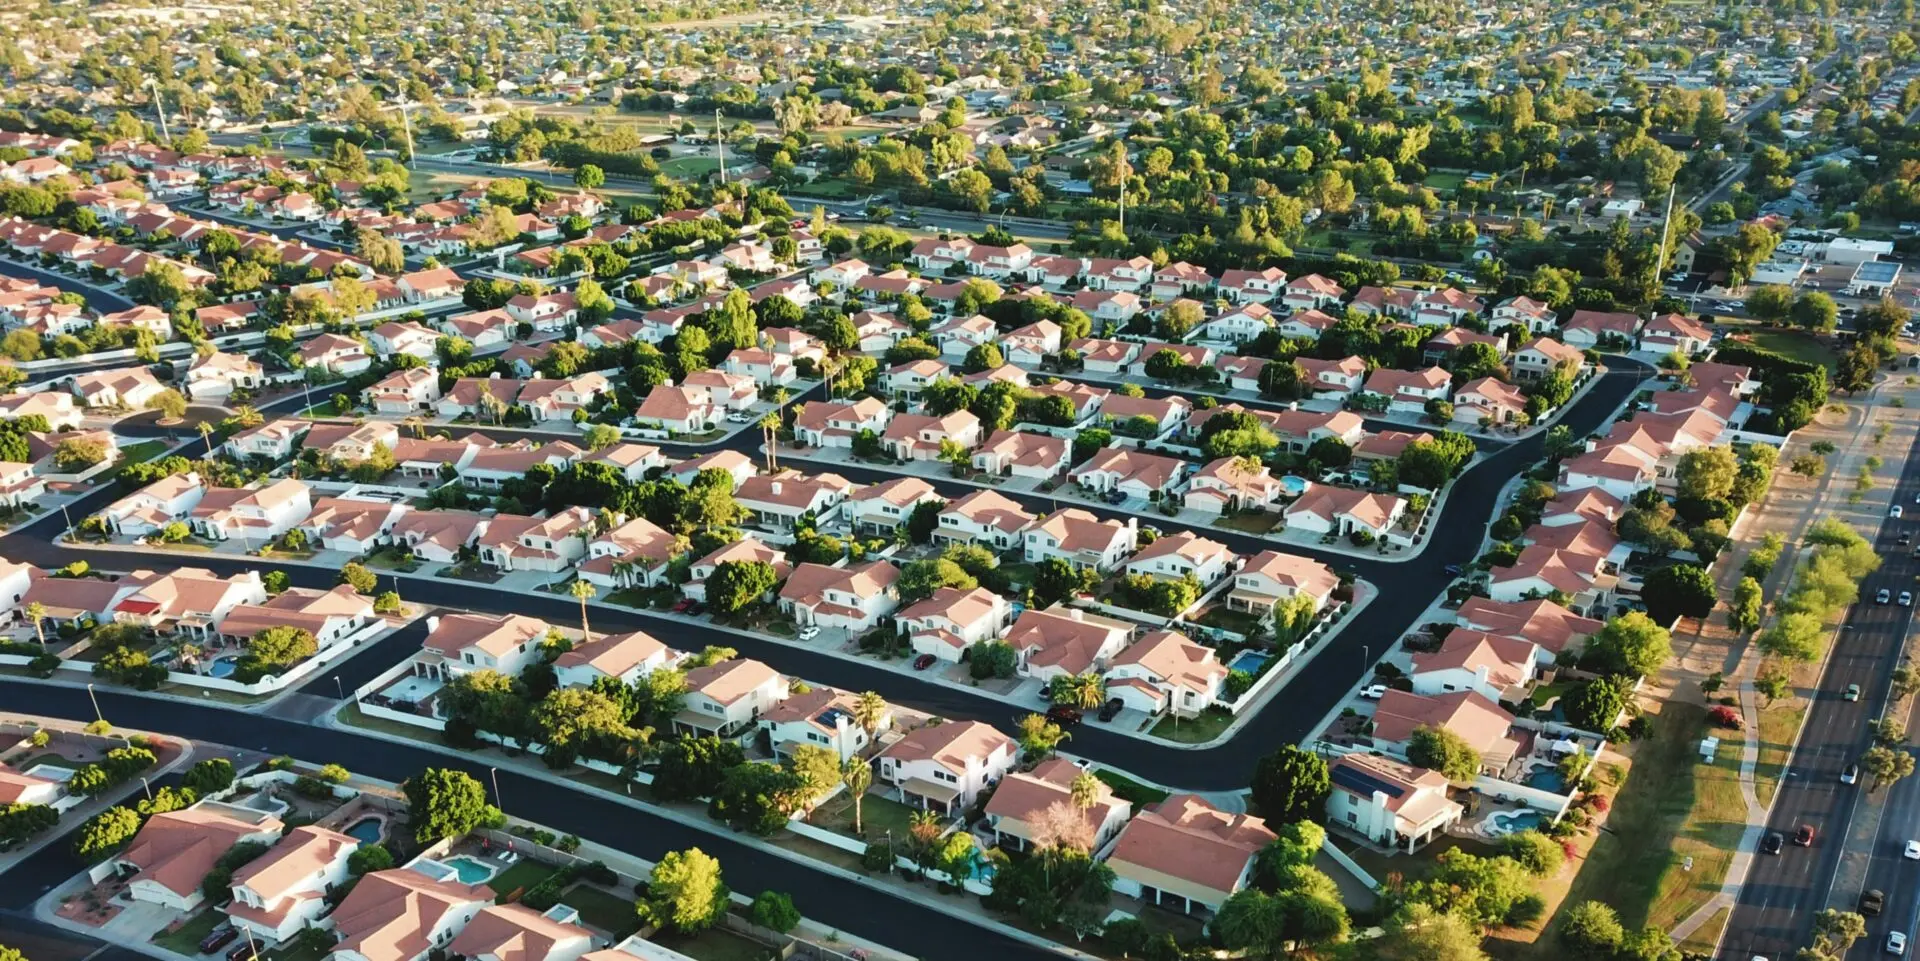 Aerial view of a suburban residential real estate development